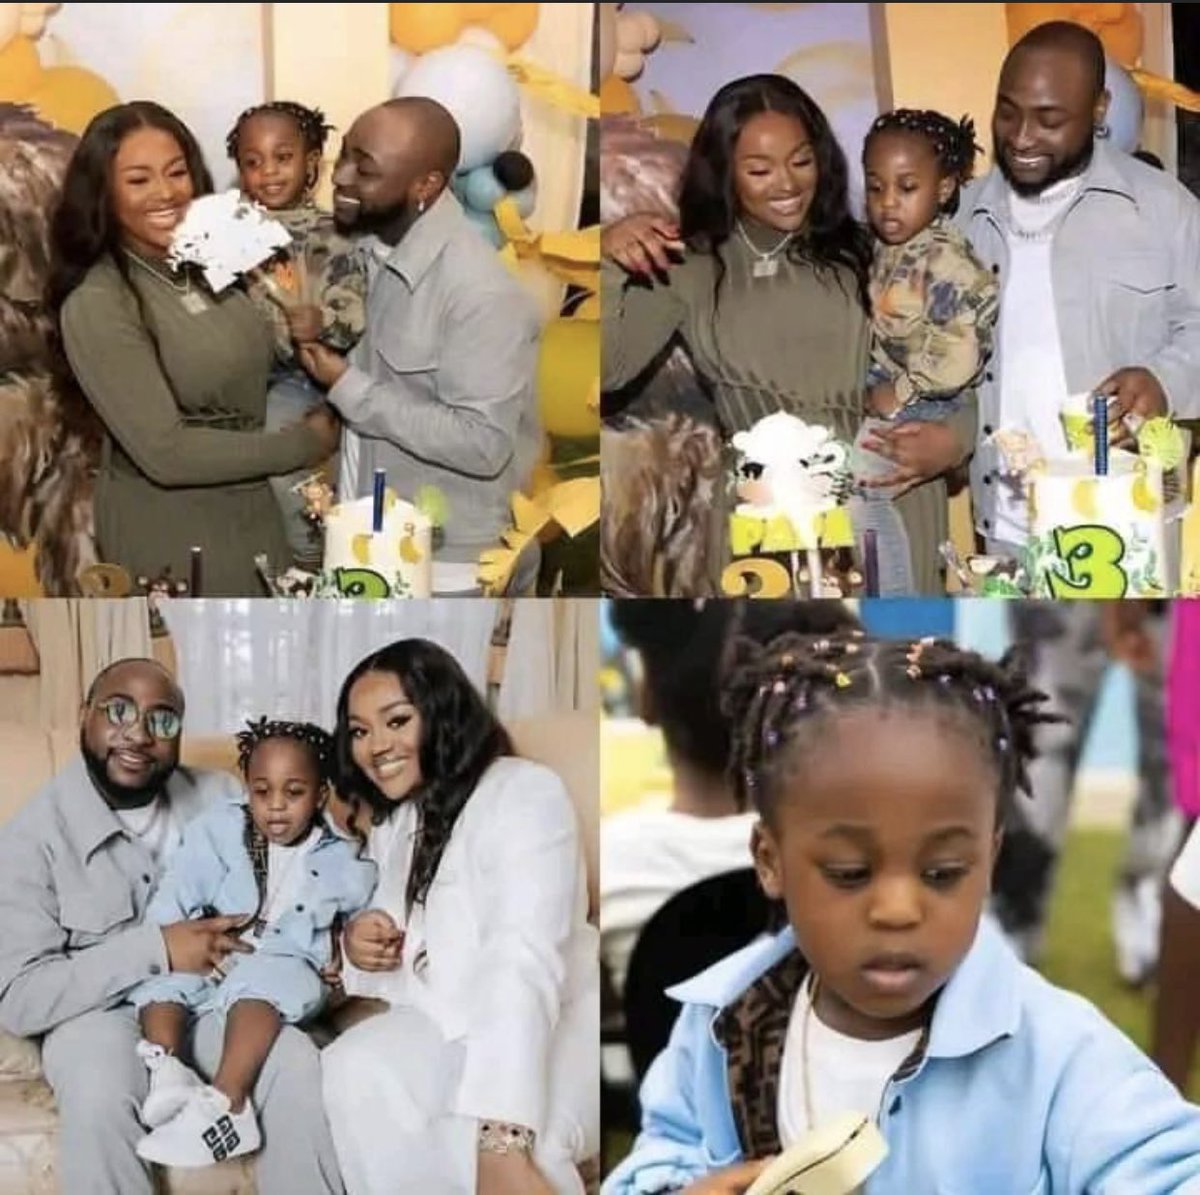 Davido does not have respect for love, marriage & death. While the world thought he was mourning baba was busy sleeping with other women, his album is making sales because of “ pity”. He is a huge disappointment to his kids & God #Davido